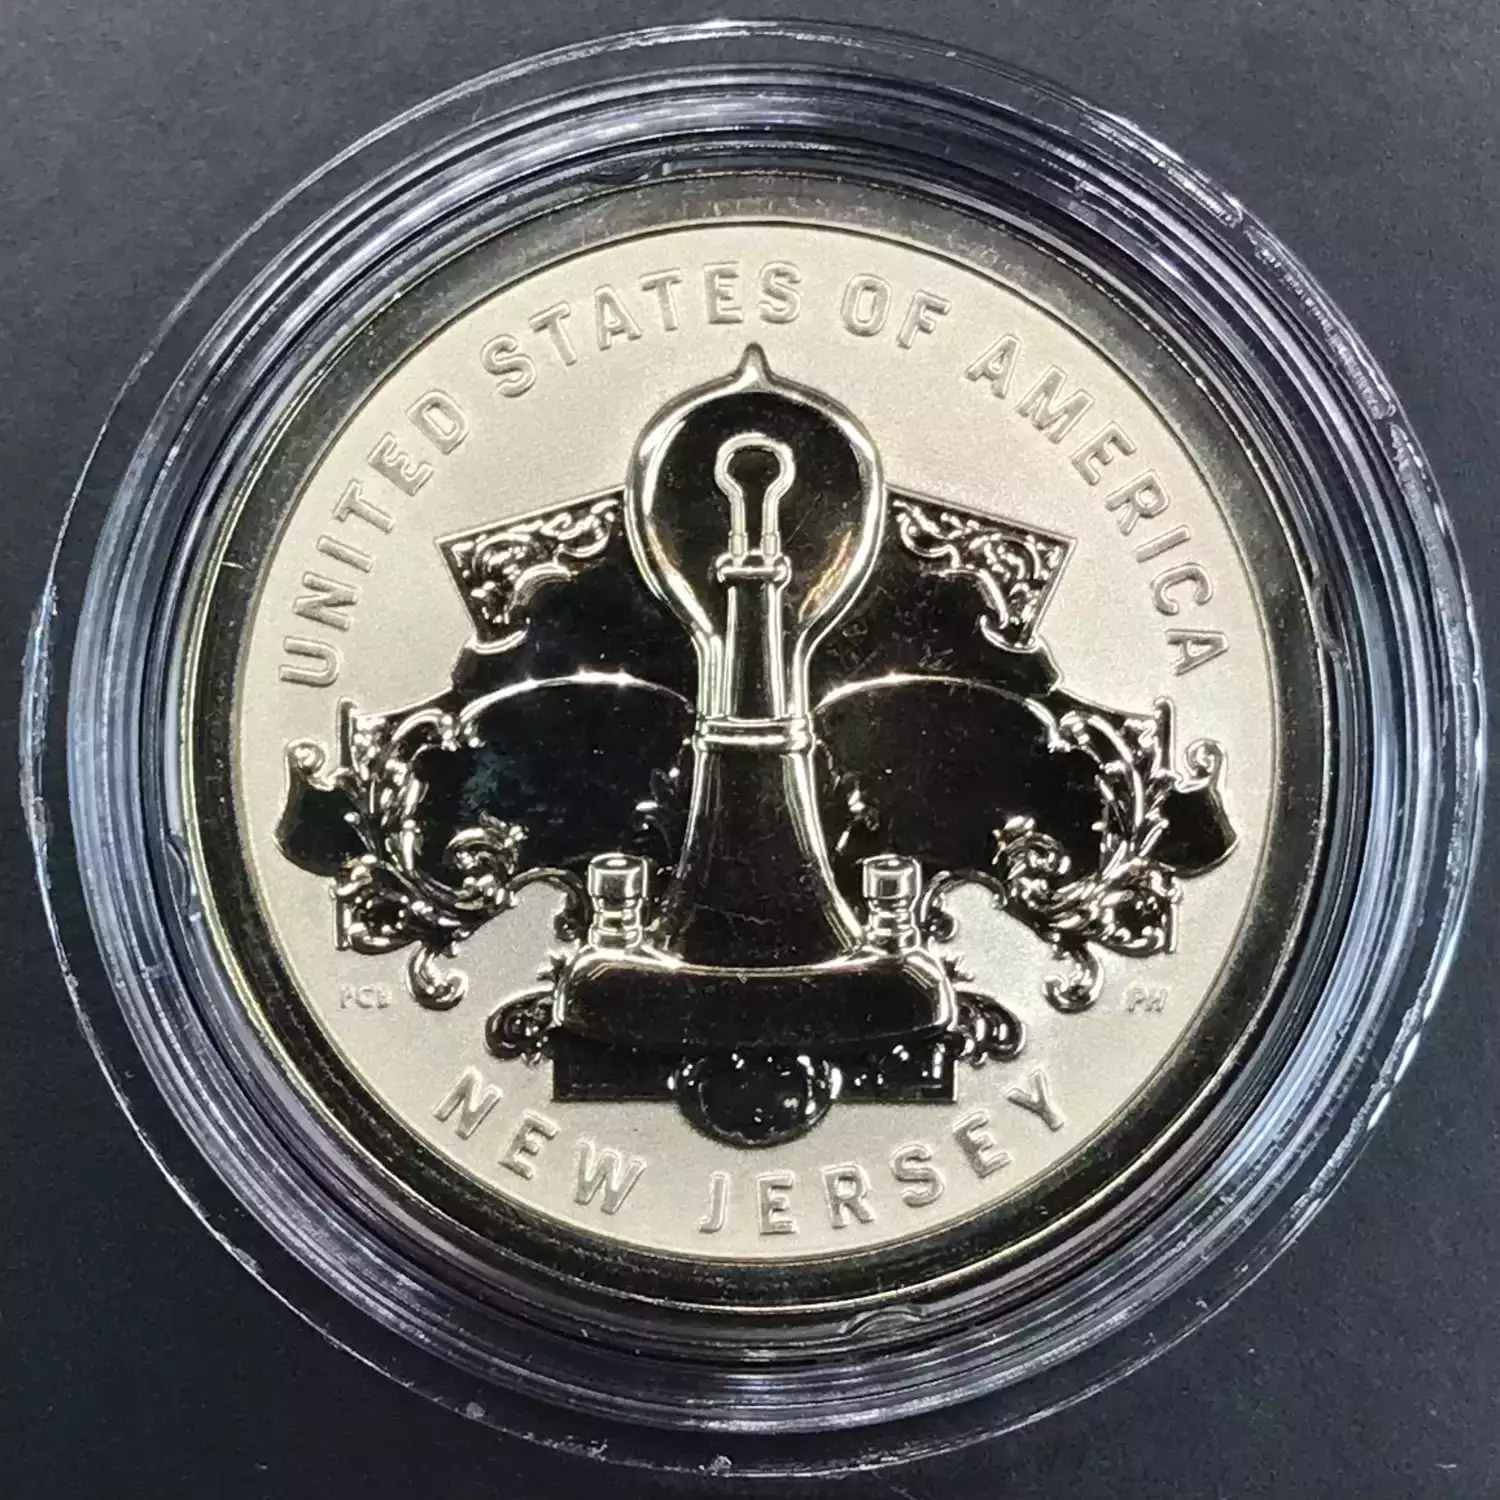 2019-S New Jersey American Innovation Dollar Reverse Proof Coin w US Mint OGP (2)